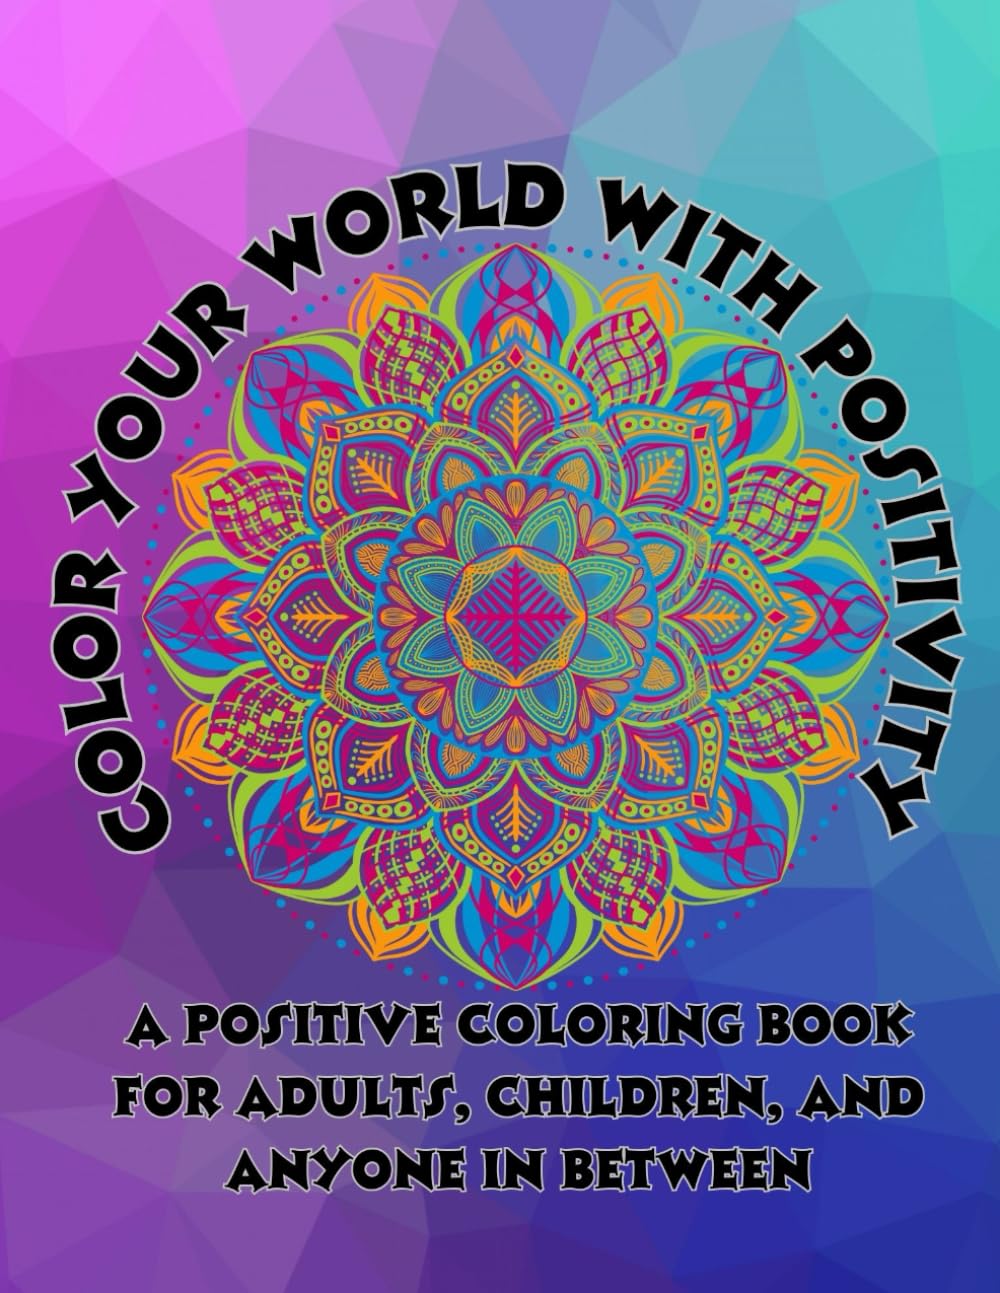 Color Your World With Positivity: A Positive Coloring book for adults, children, and anyone in between